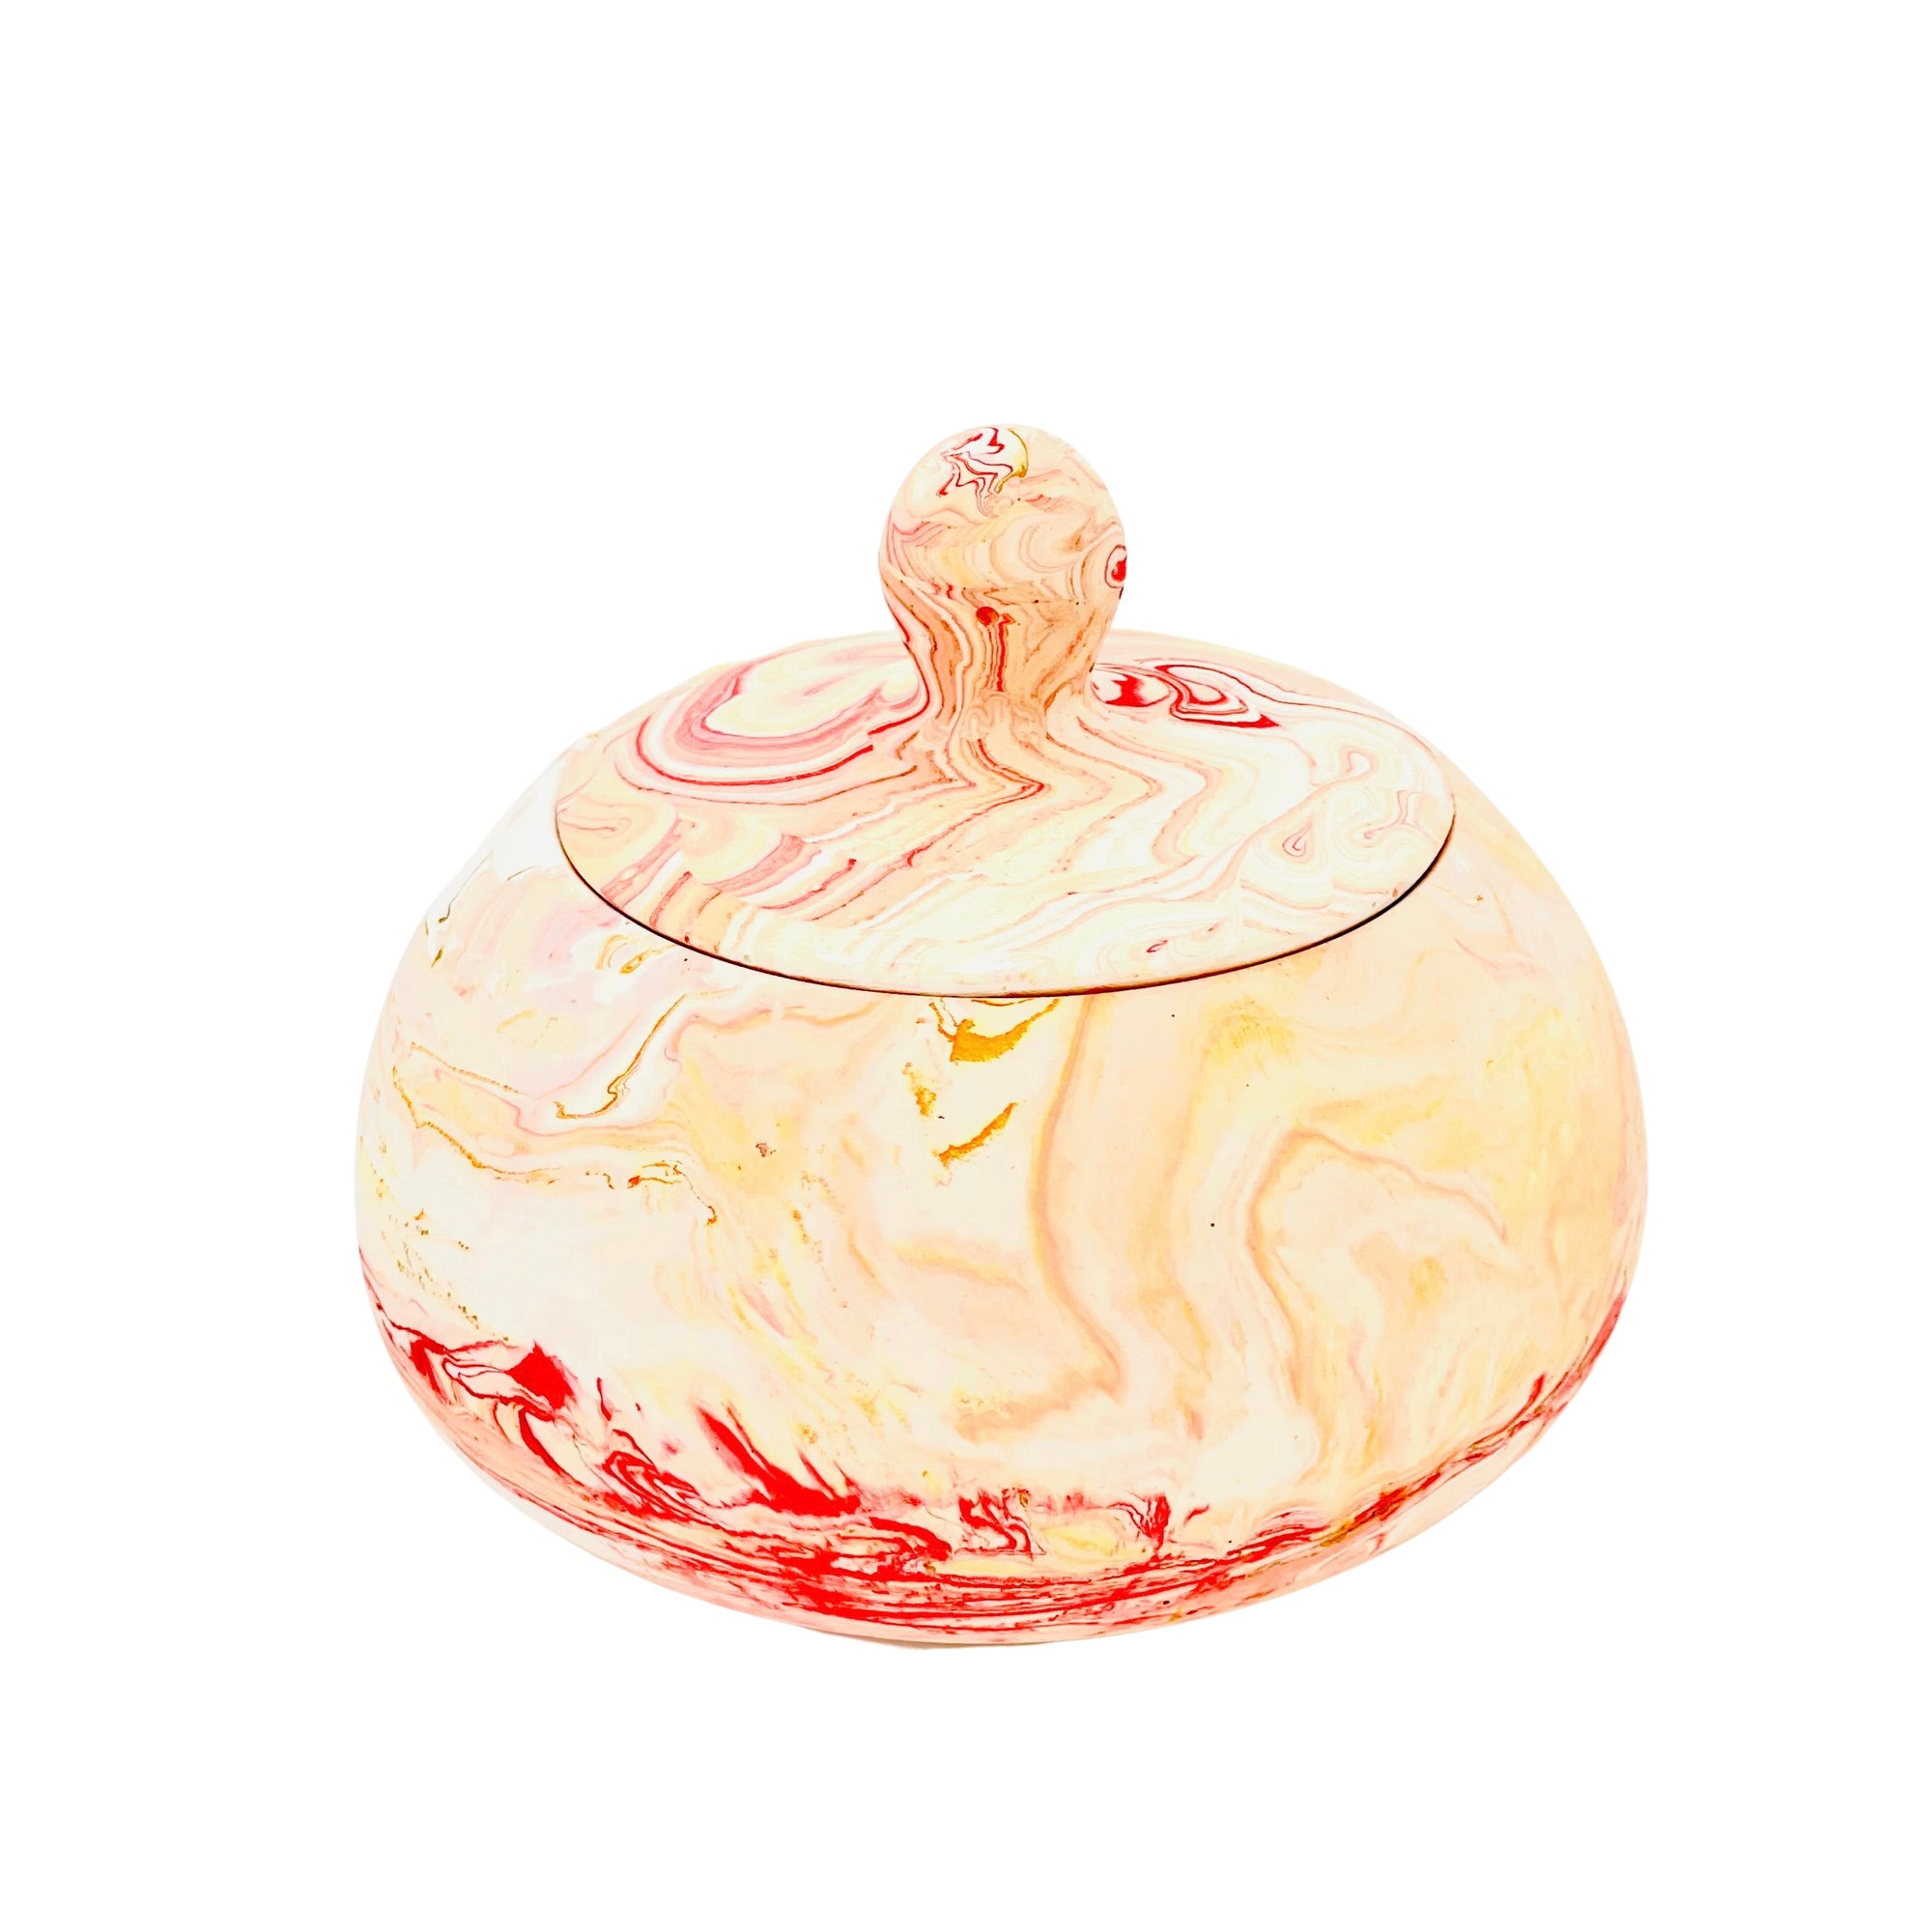 A Jesmonite globe shaped trinket bowl with lid marbled with red and orange pigment.